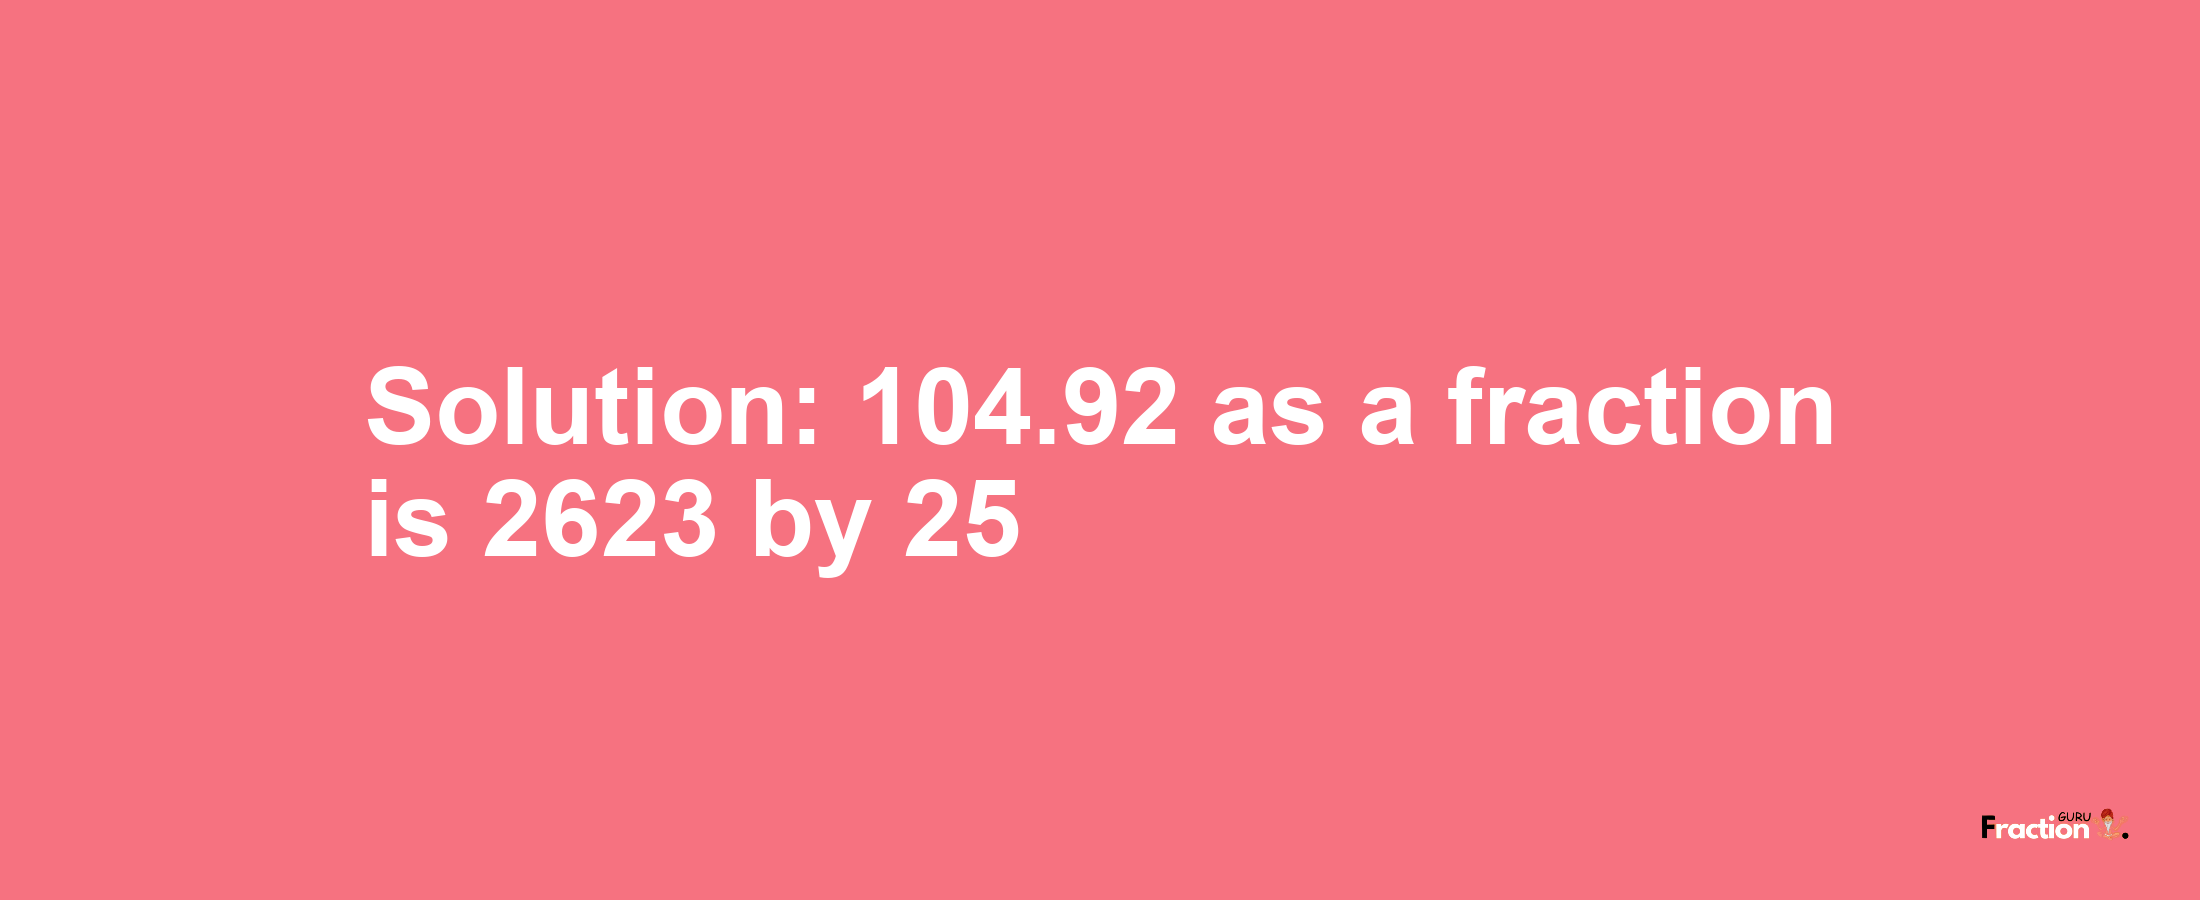 Solution:104.92 as a fraction is 2623/25